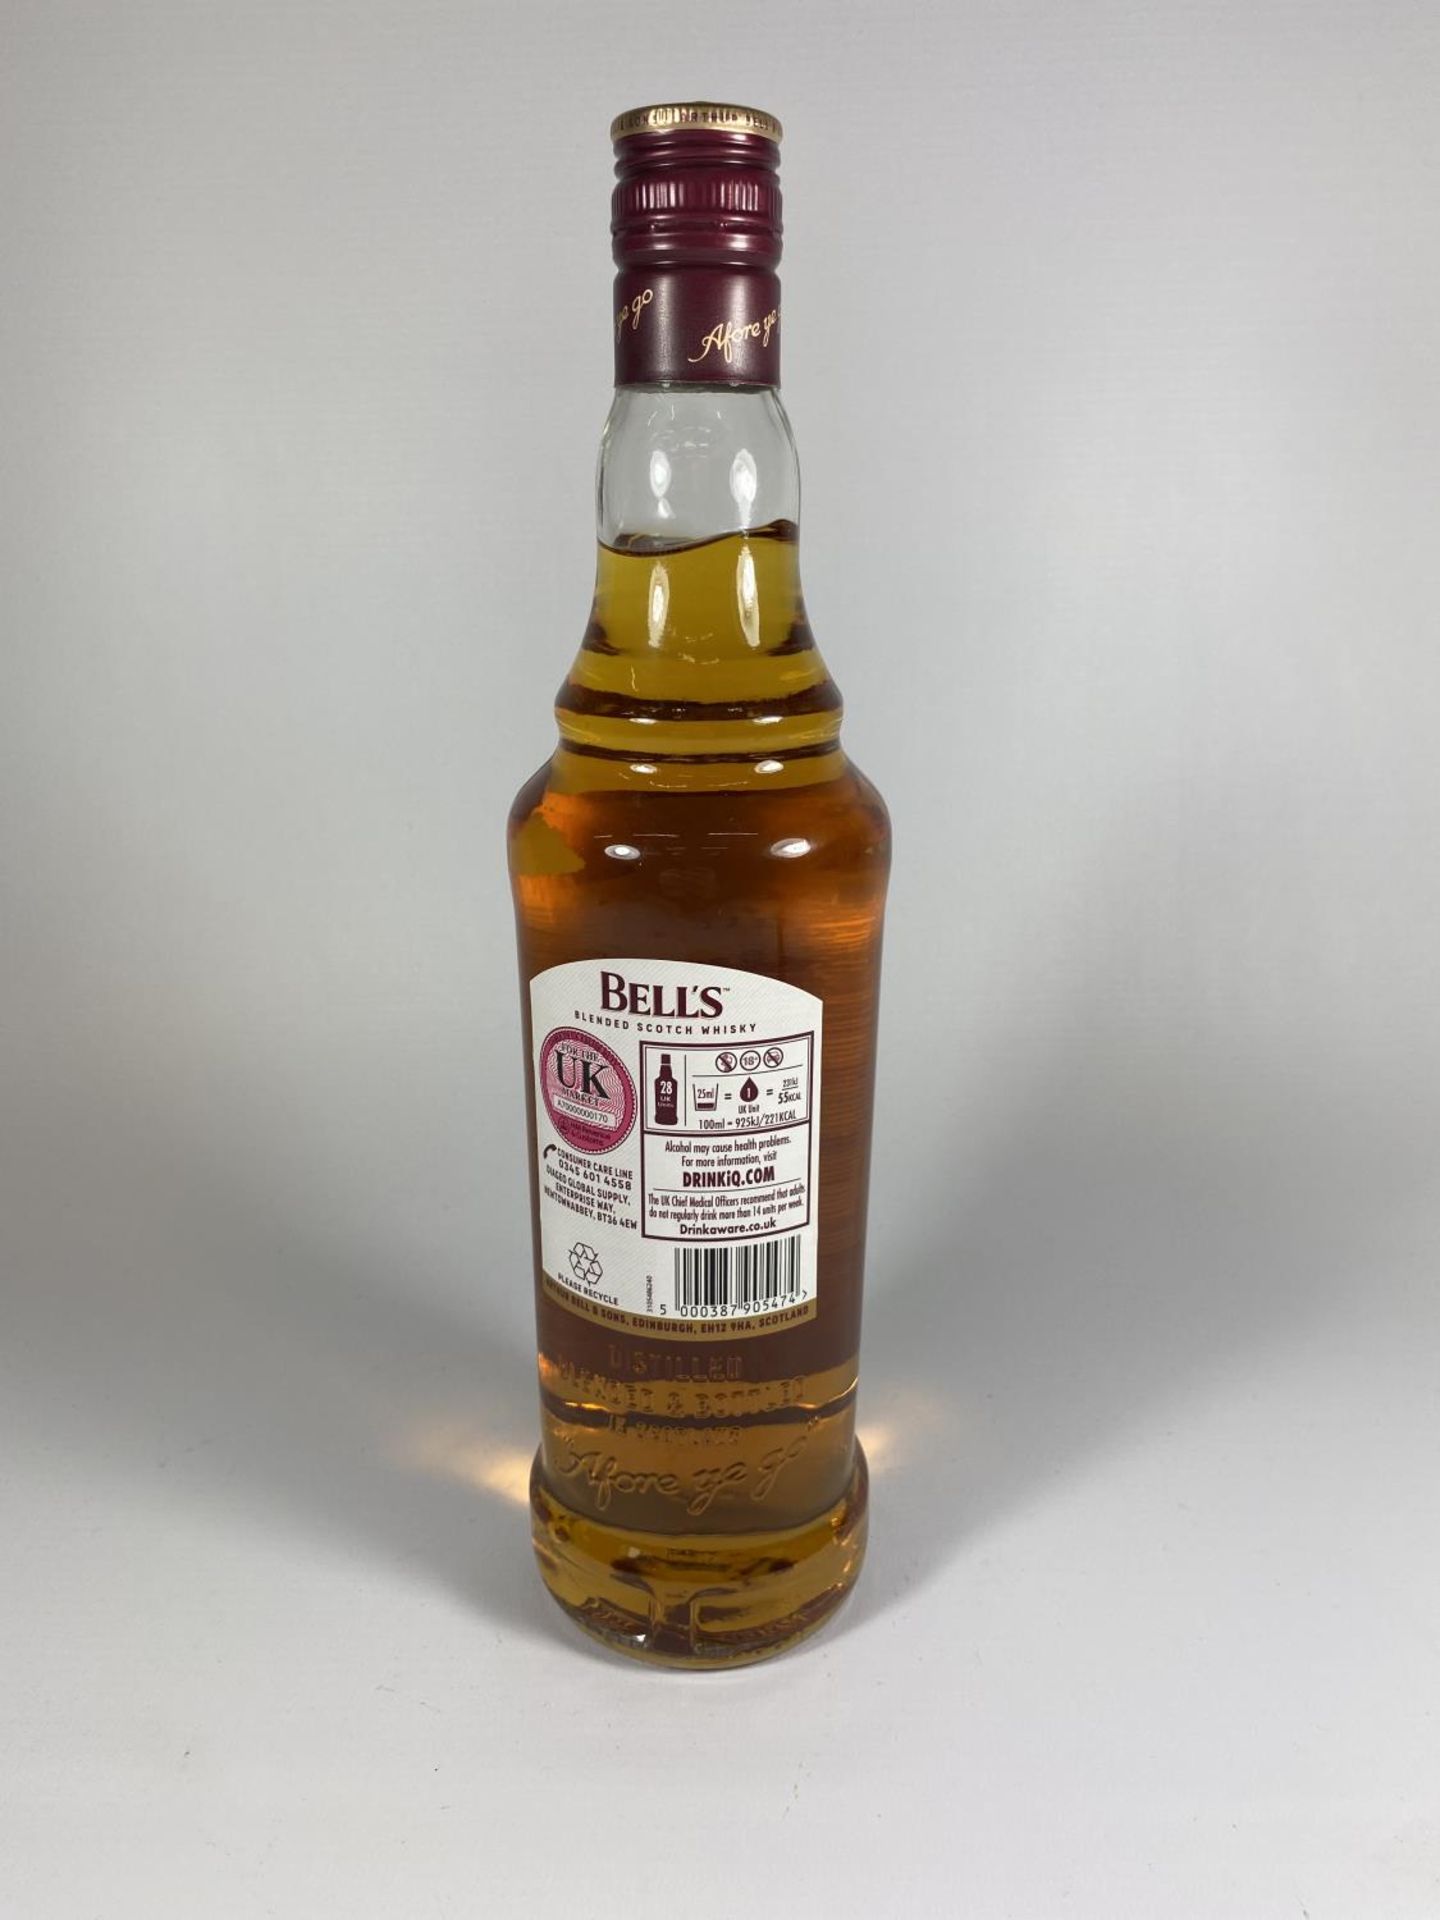 1 X 70CL BOTTLE - BELL'S BLENDED SCOTCH WHISKY - Image 2 of 2